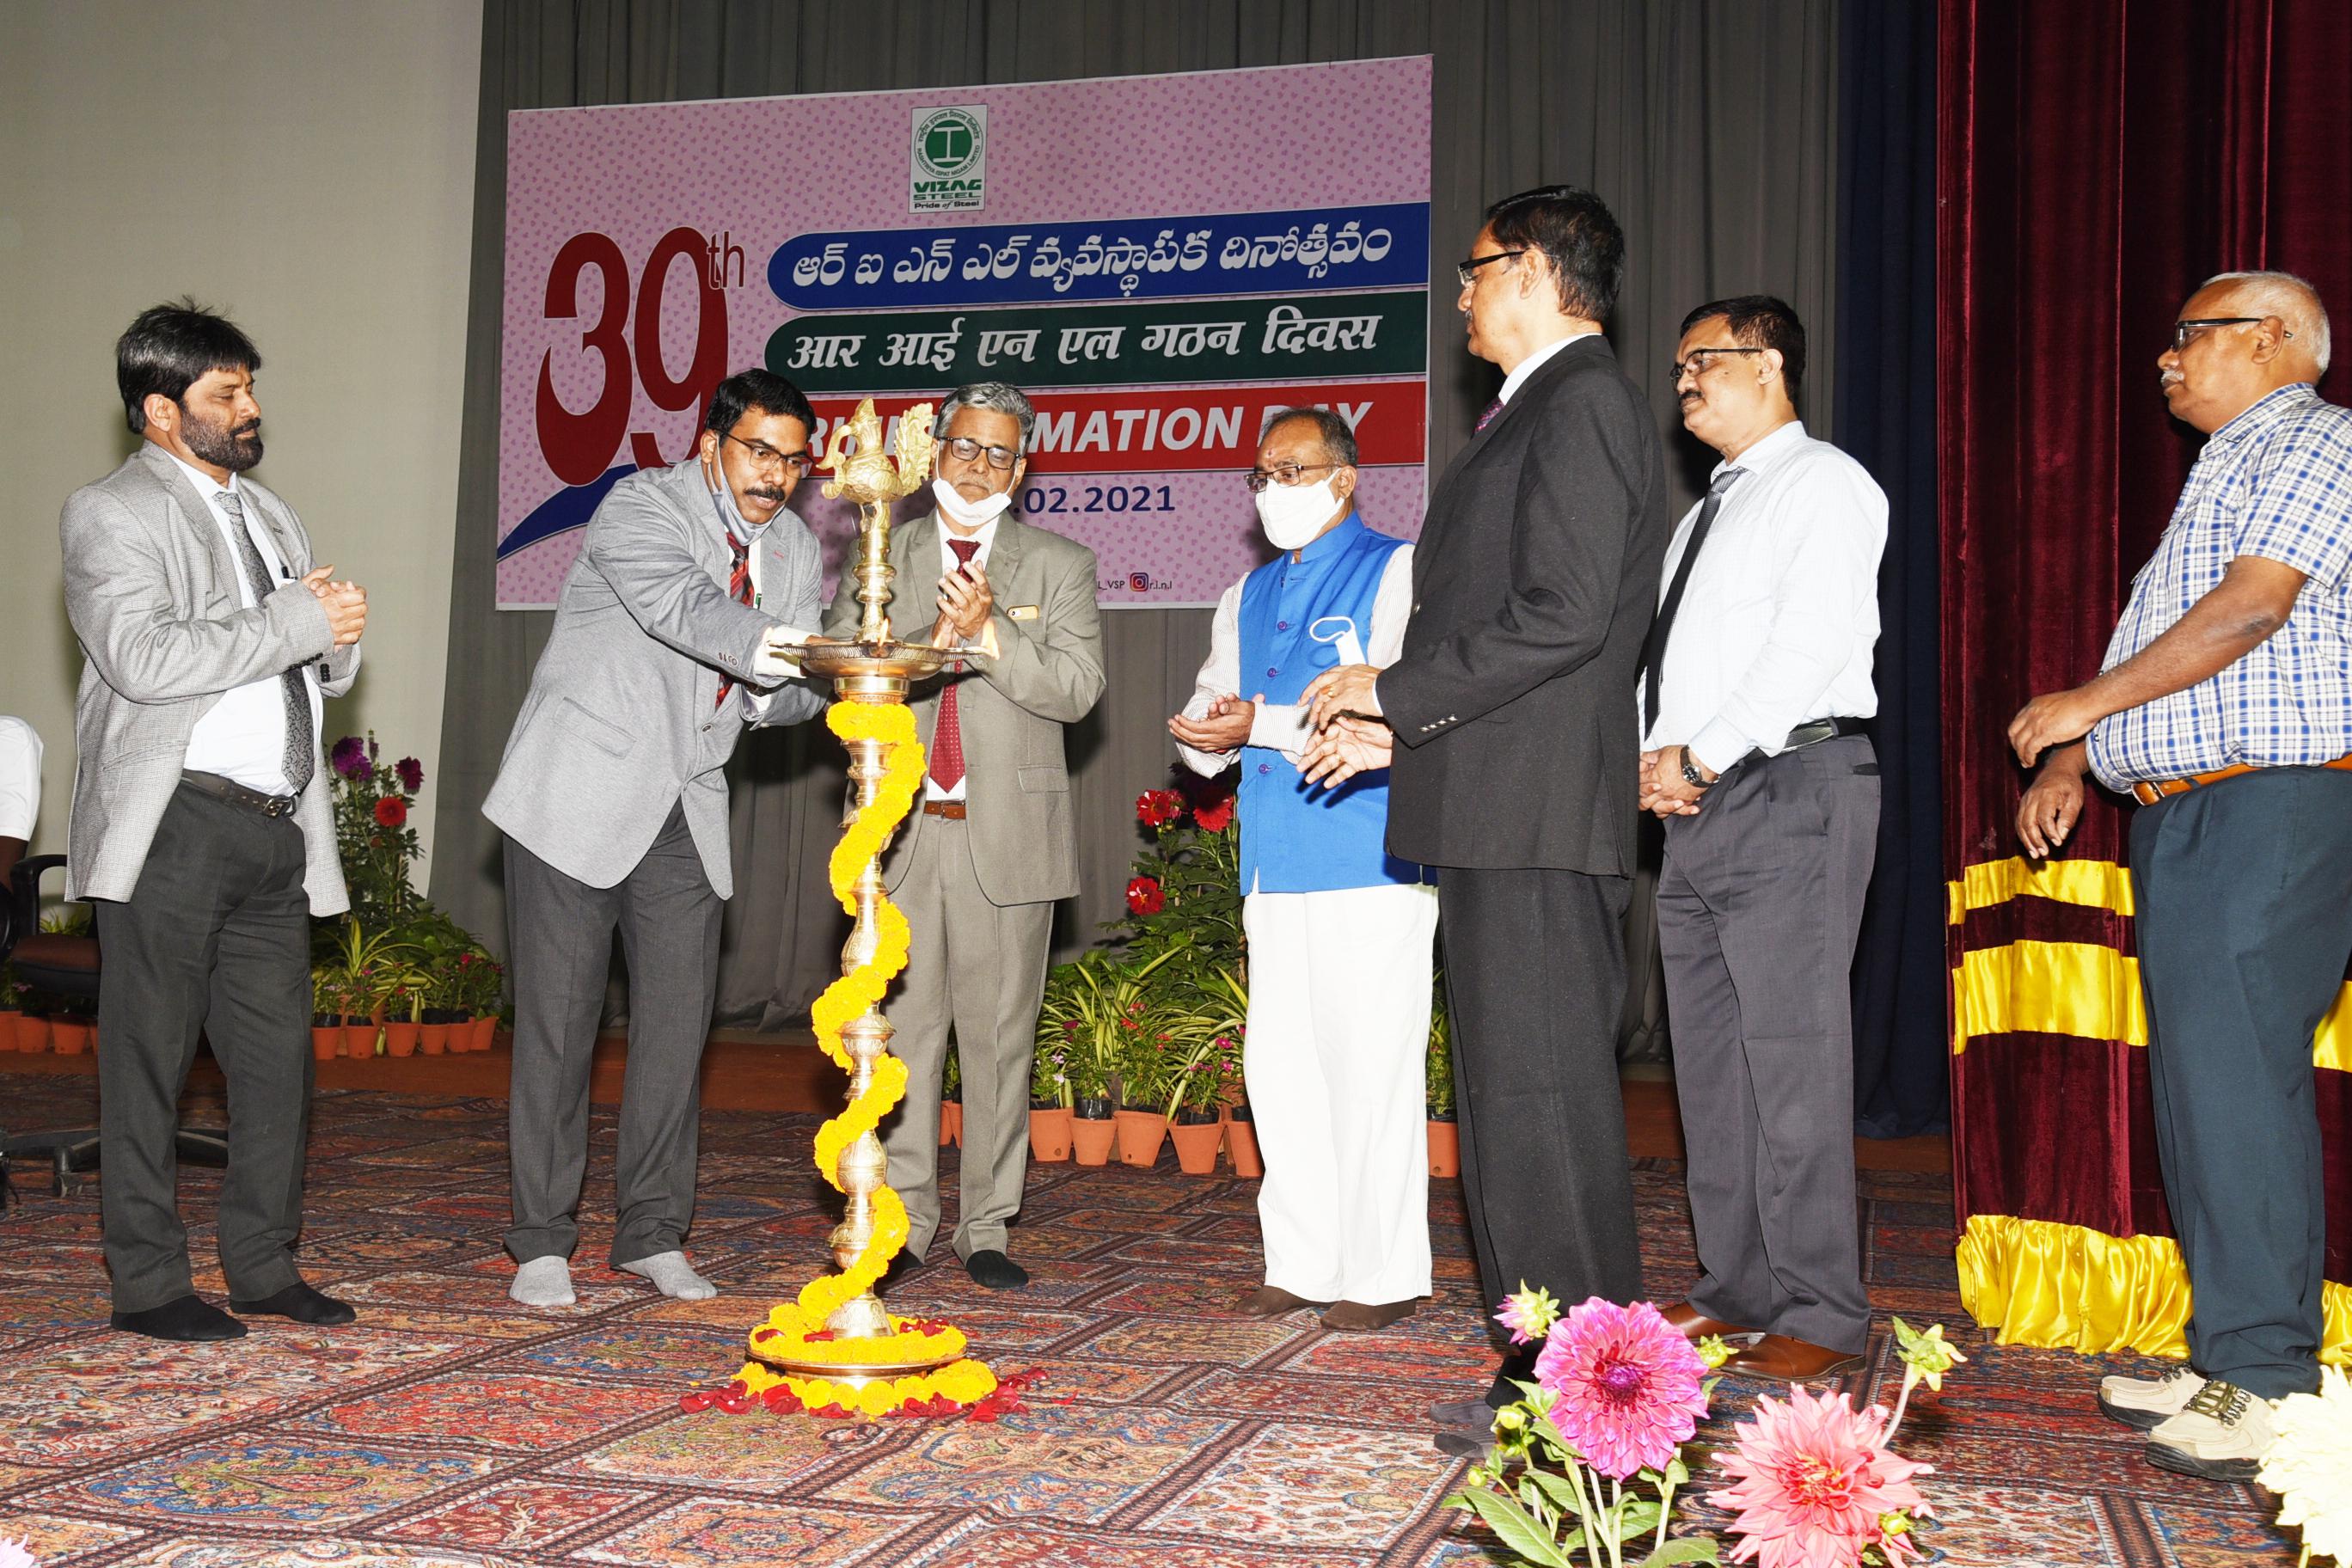 39th Formation Day function of RINLVSP